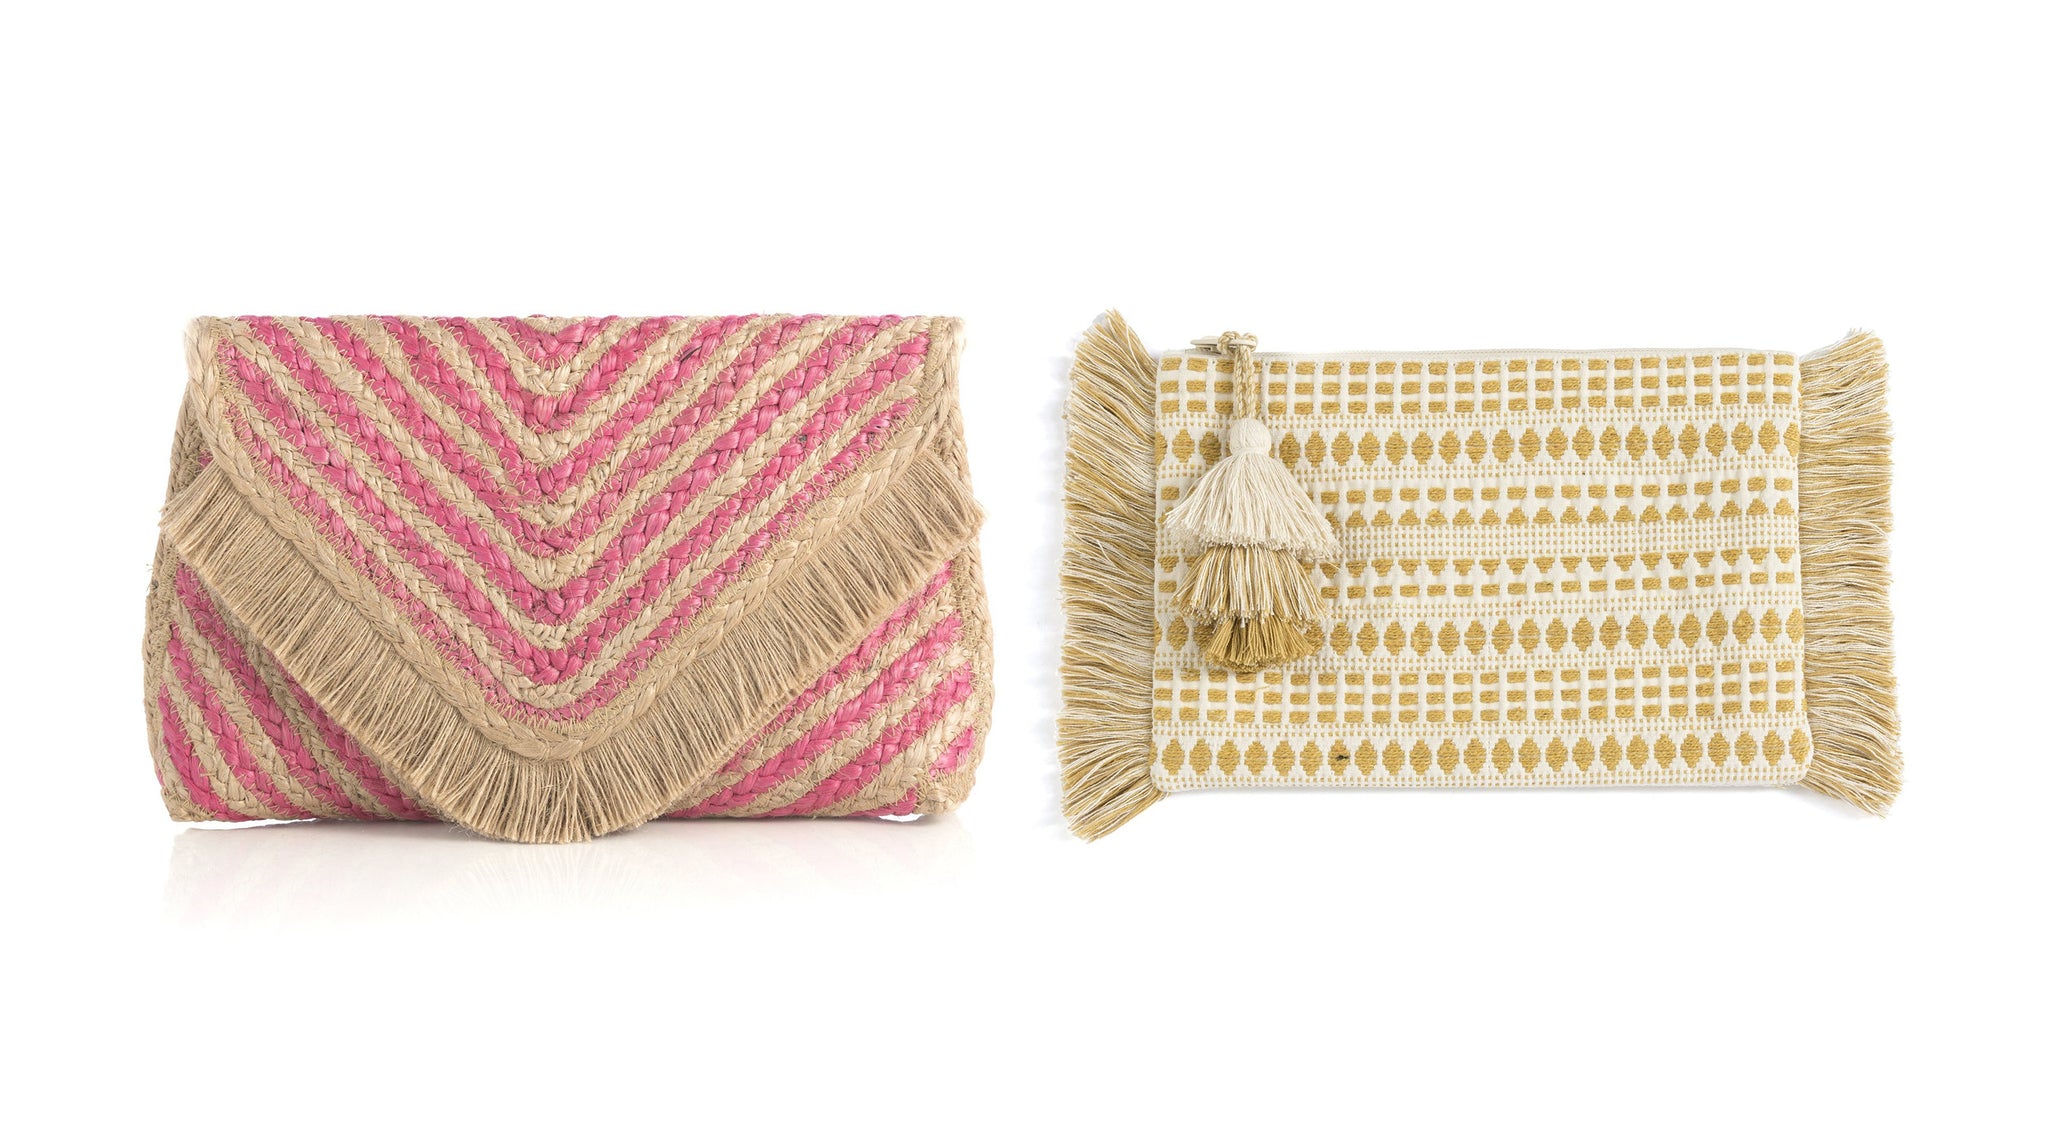 pink and natural striped jute clutch